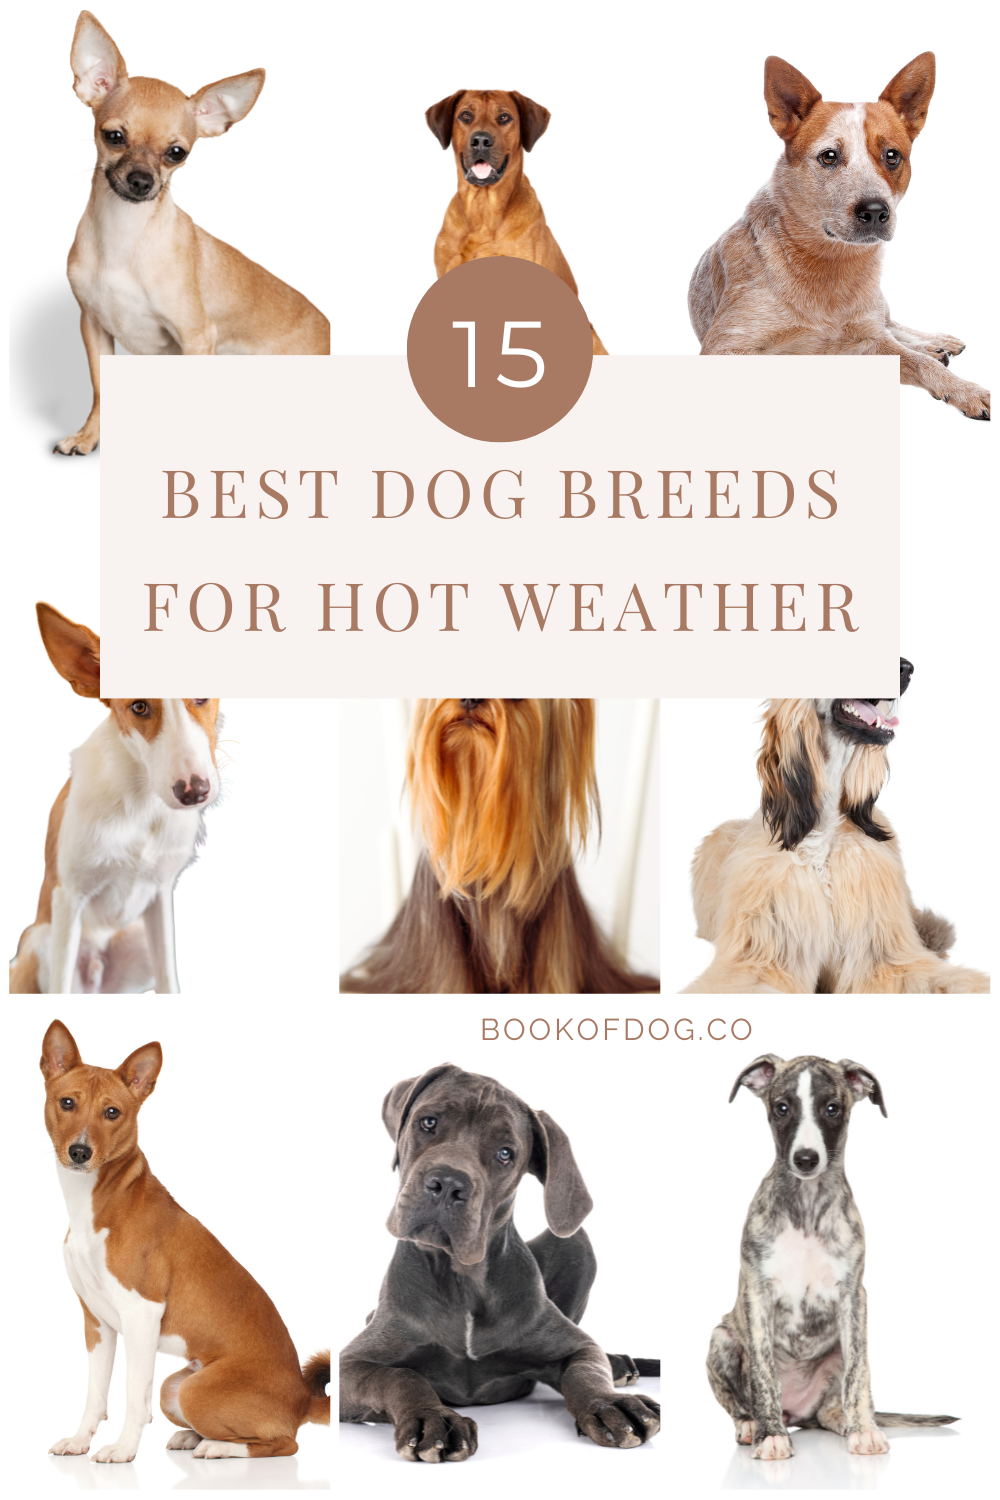 II. Characteristics of Dog Breeds Suitable for Hot Weather